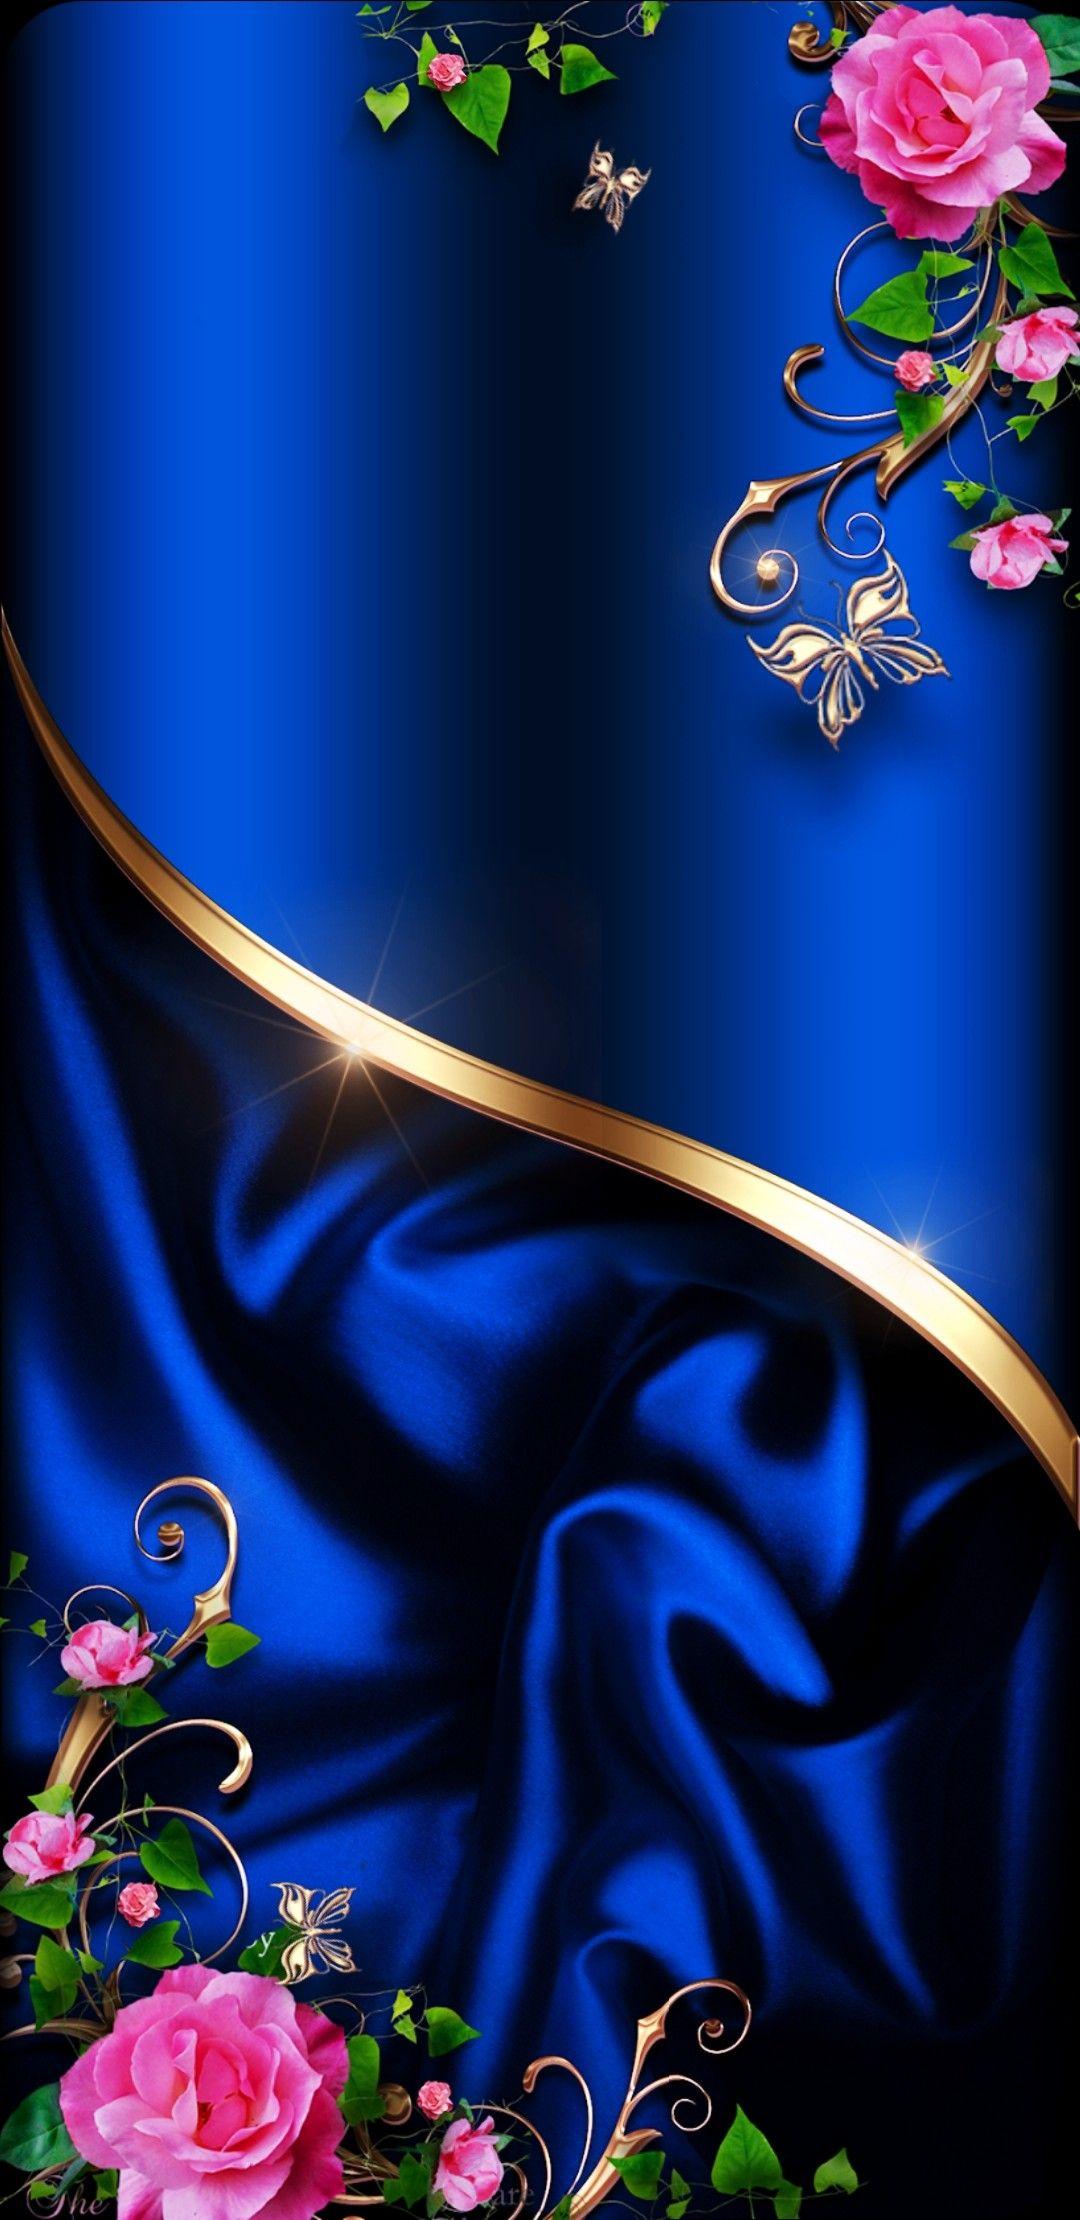 Wallpaper.By Artist Unknown. Bling wallpaper, Phone